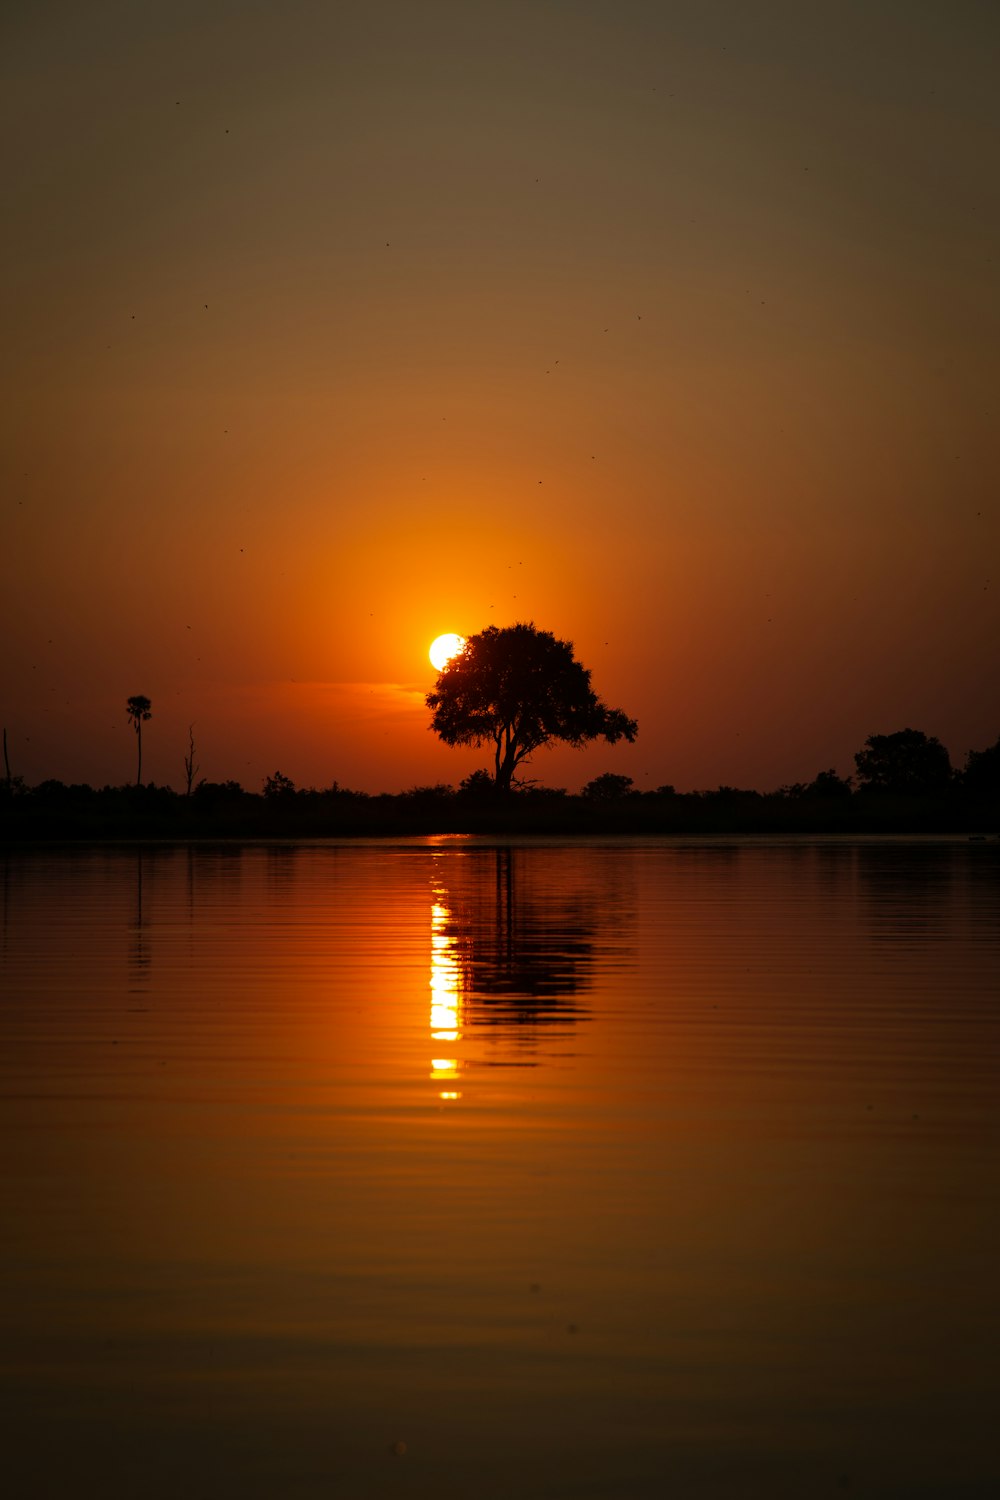 a tree is silhouetted against the setting sun